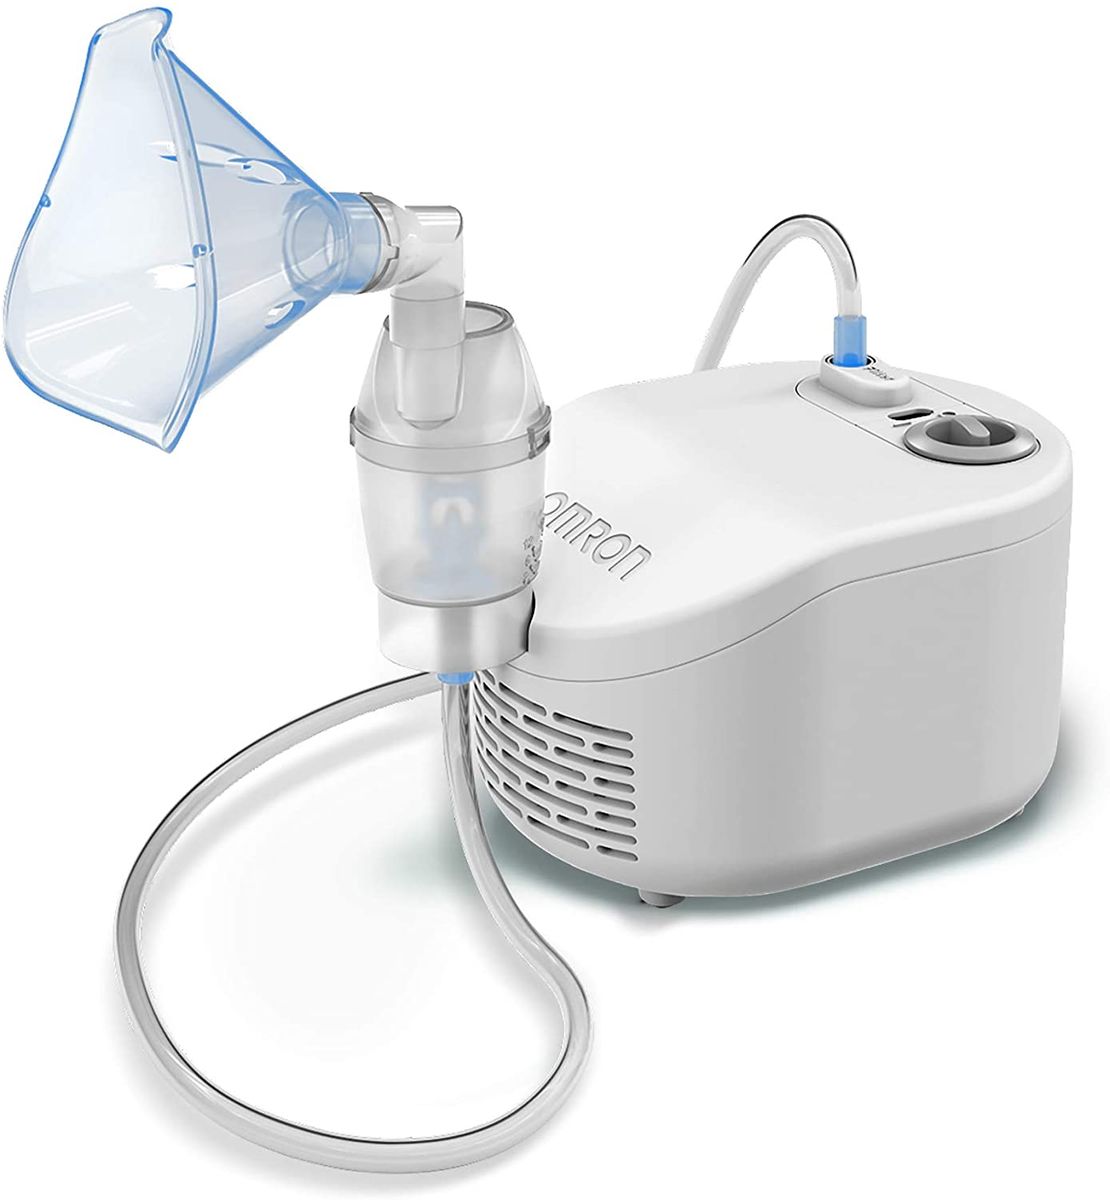 Omron X101 Easy Nebulizer - Aerosol inhaler for easy treatment of respiratory diseases such as asthma, cough or even allergies - Suitable for adults and children X101 For the whole family.